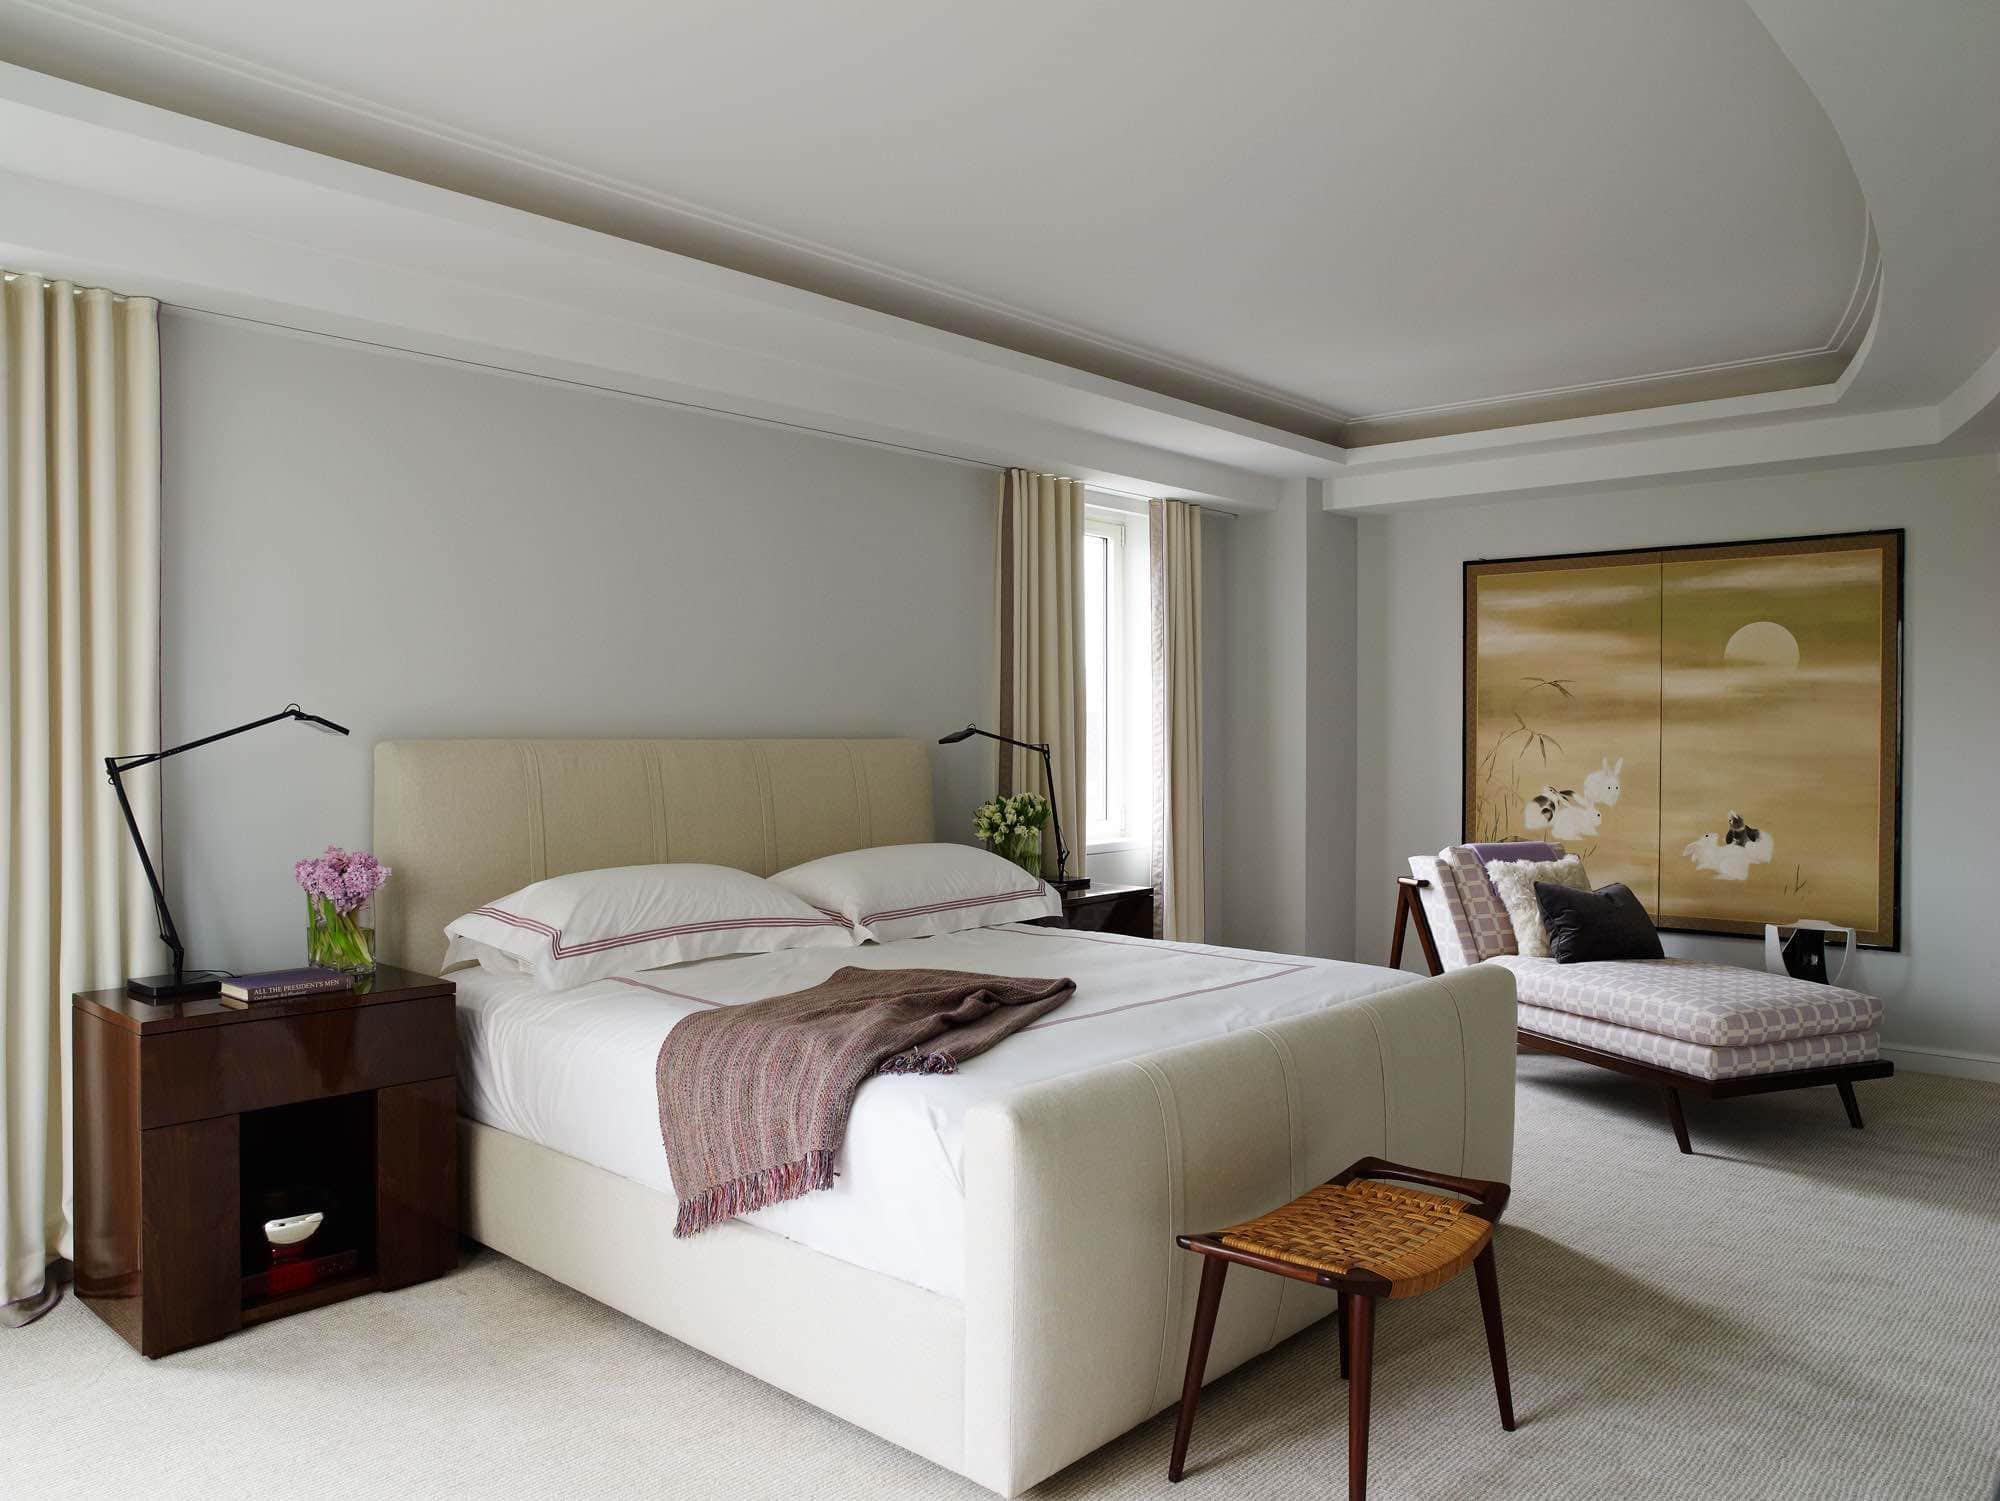 In the master suite of this fifth avenue apartment which overlooks Central Park, Carol Egan designed the bedside tables in walnut with table lamps by Flos.  The bed is a custom design with headboard and footboard upholstered in natural linen fabric.  The carpet is wall to wall installation of a hand-woven wool cut pile.